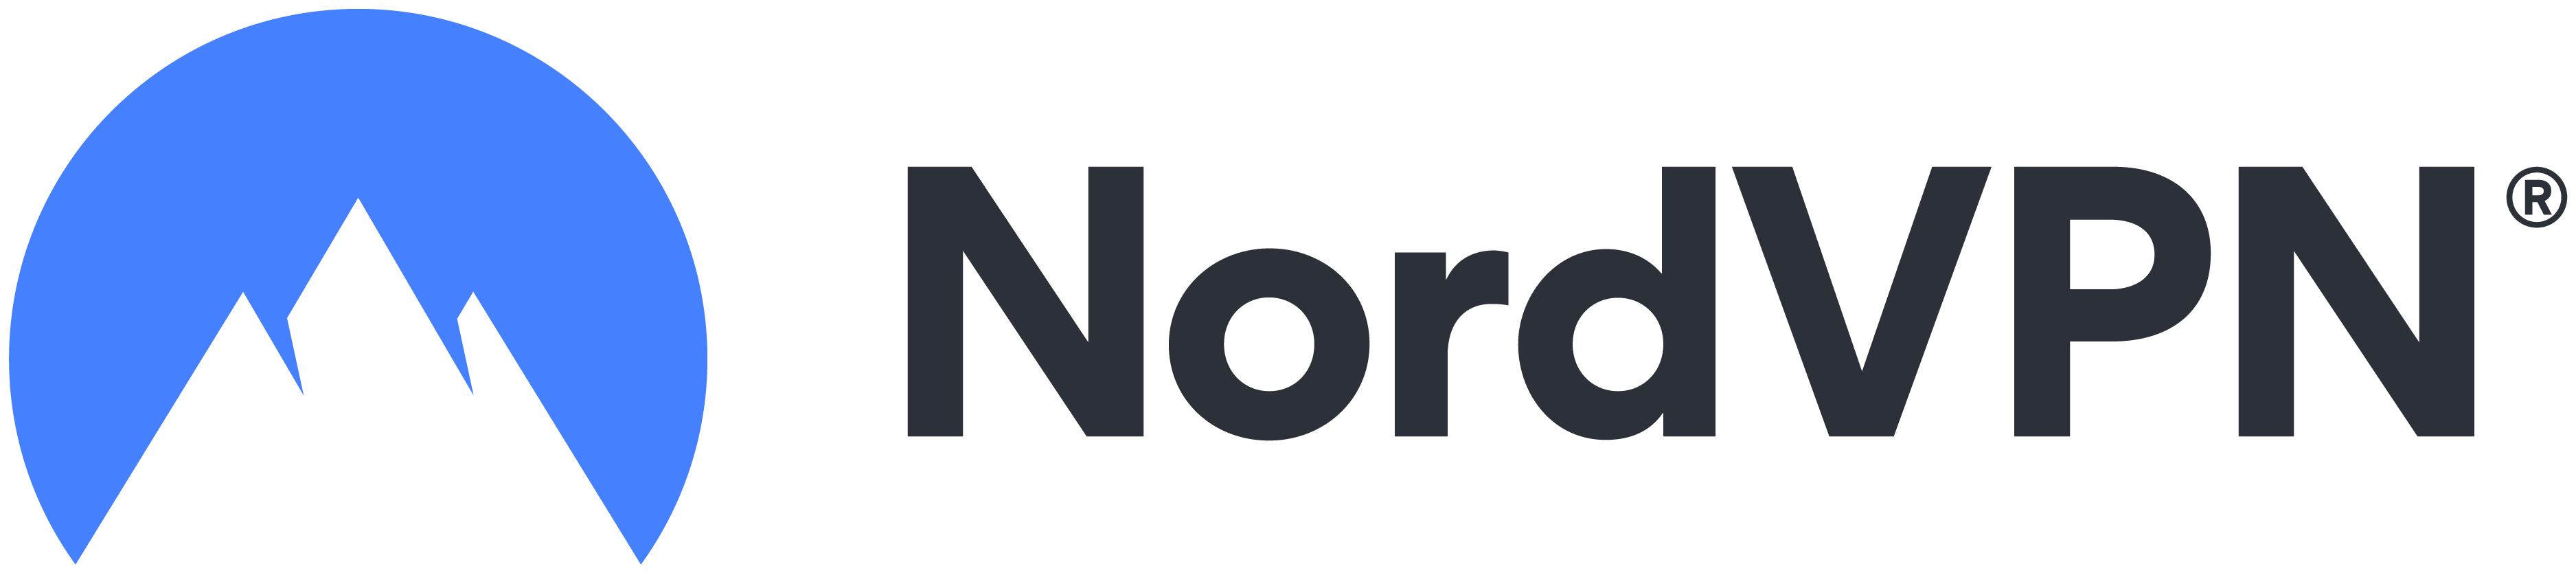 The Complete NordVPN Discounts & Coupons!